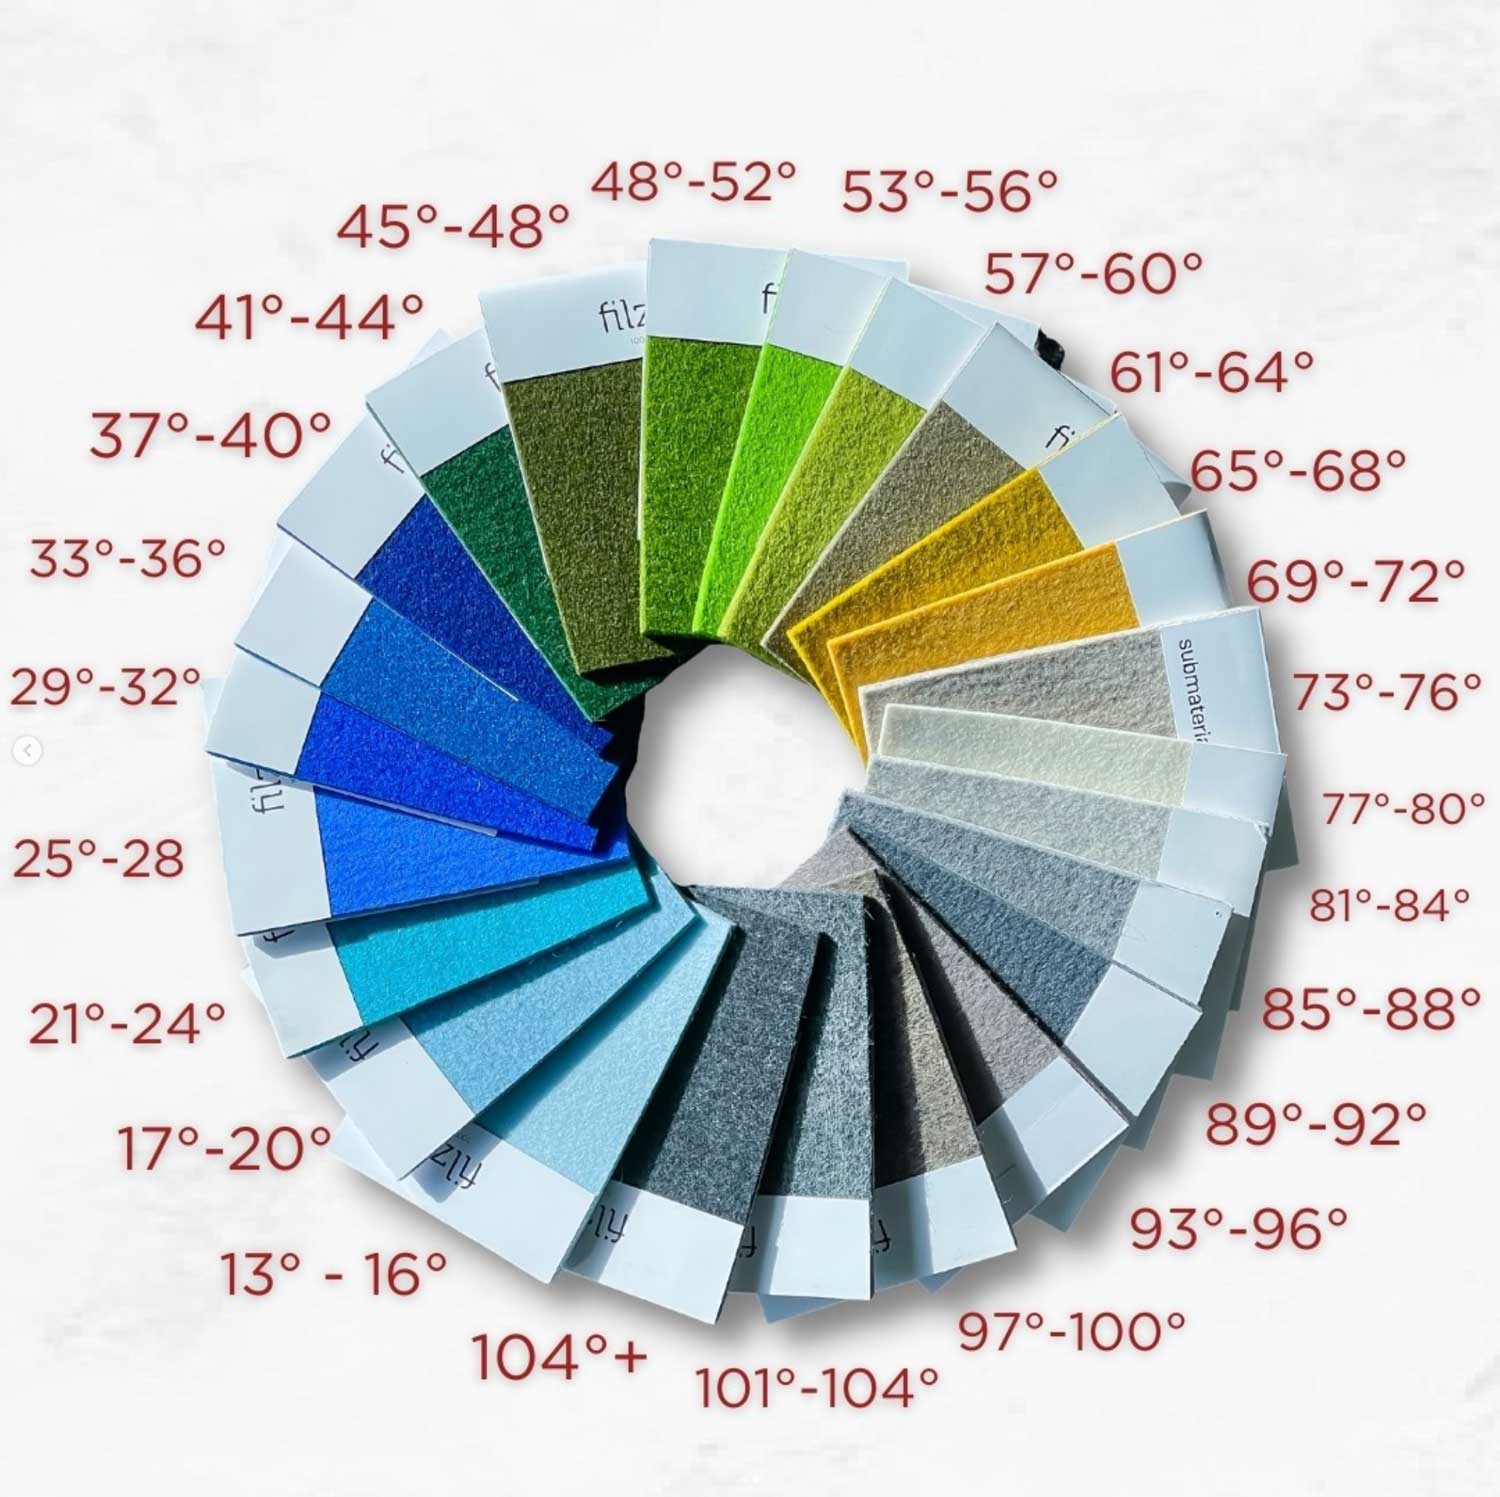 a color wheel of felt samples with a temperature range in red text for each color 